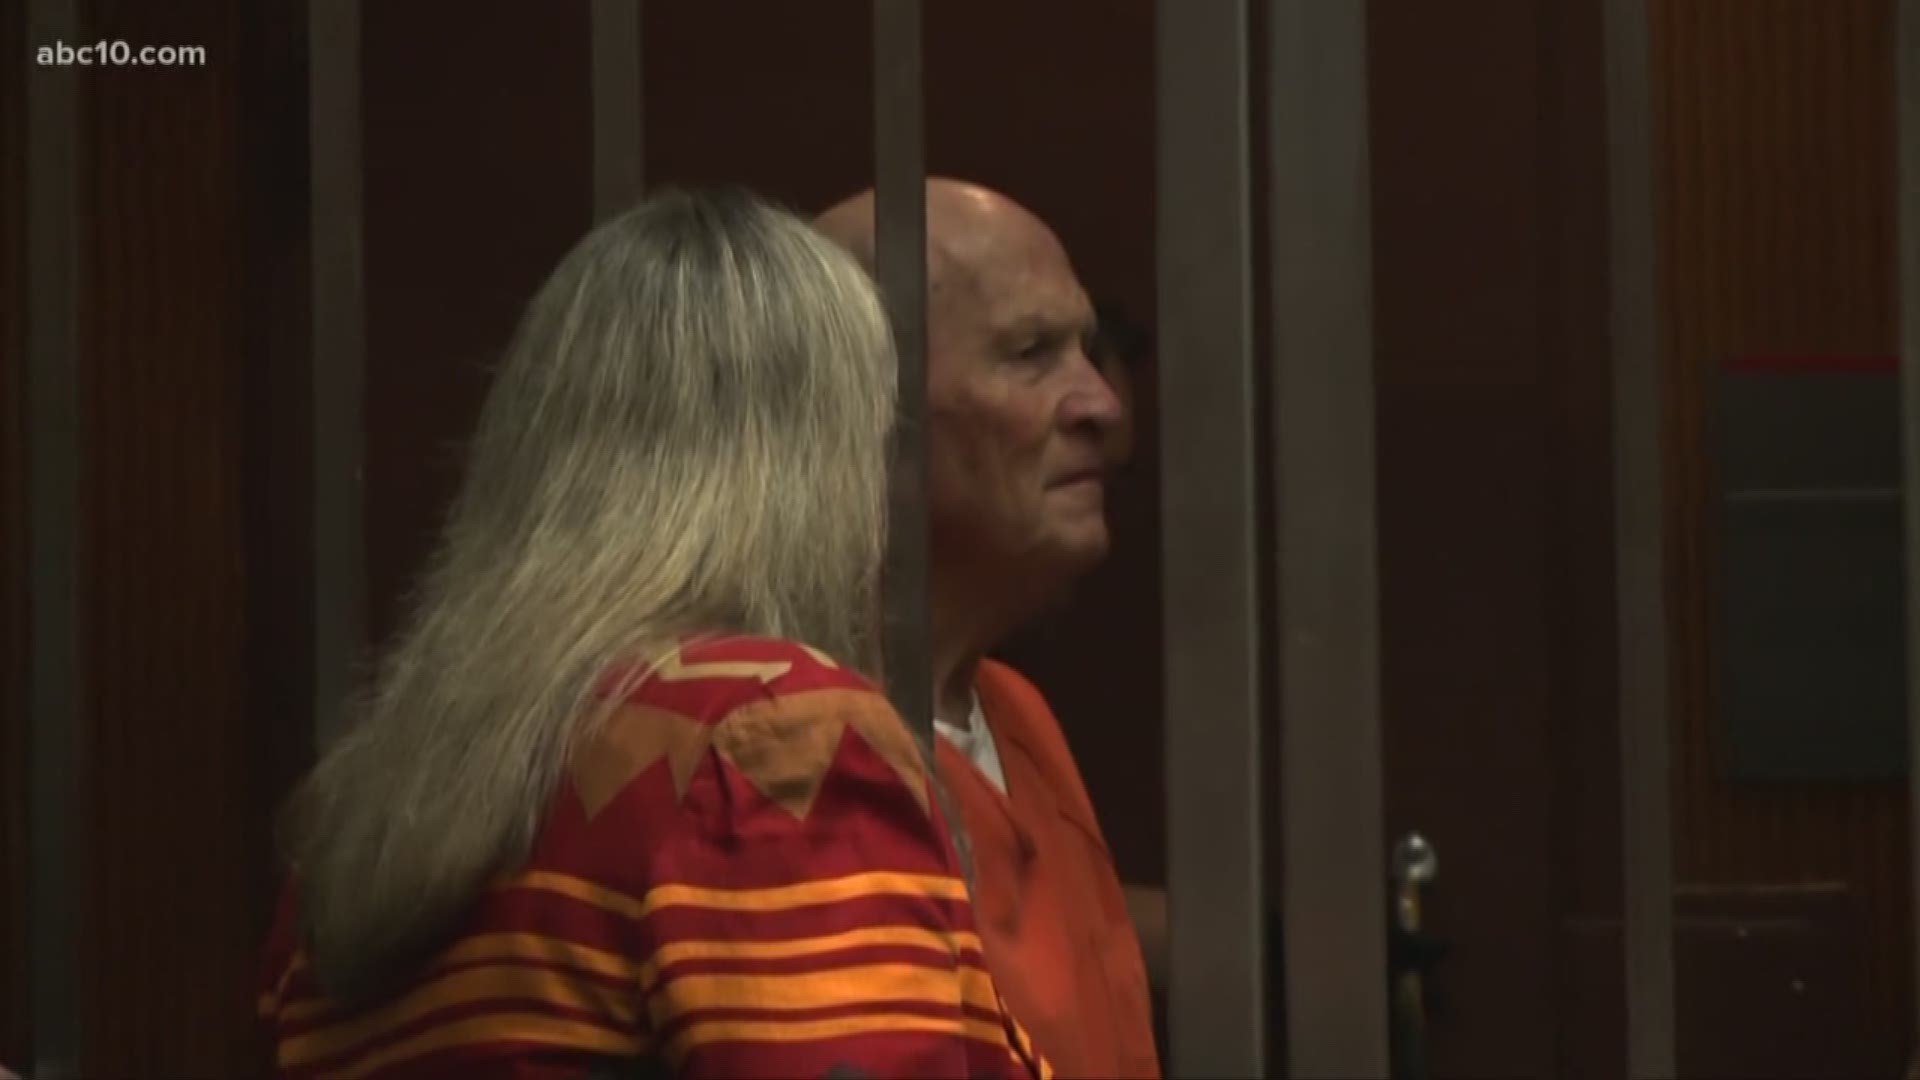 Attorneys for Joseph DeAngelo Jr., the accused Golden State Killer, said he is offering to plead guilty if prosecutors agree not to seek the death penalty.